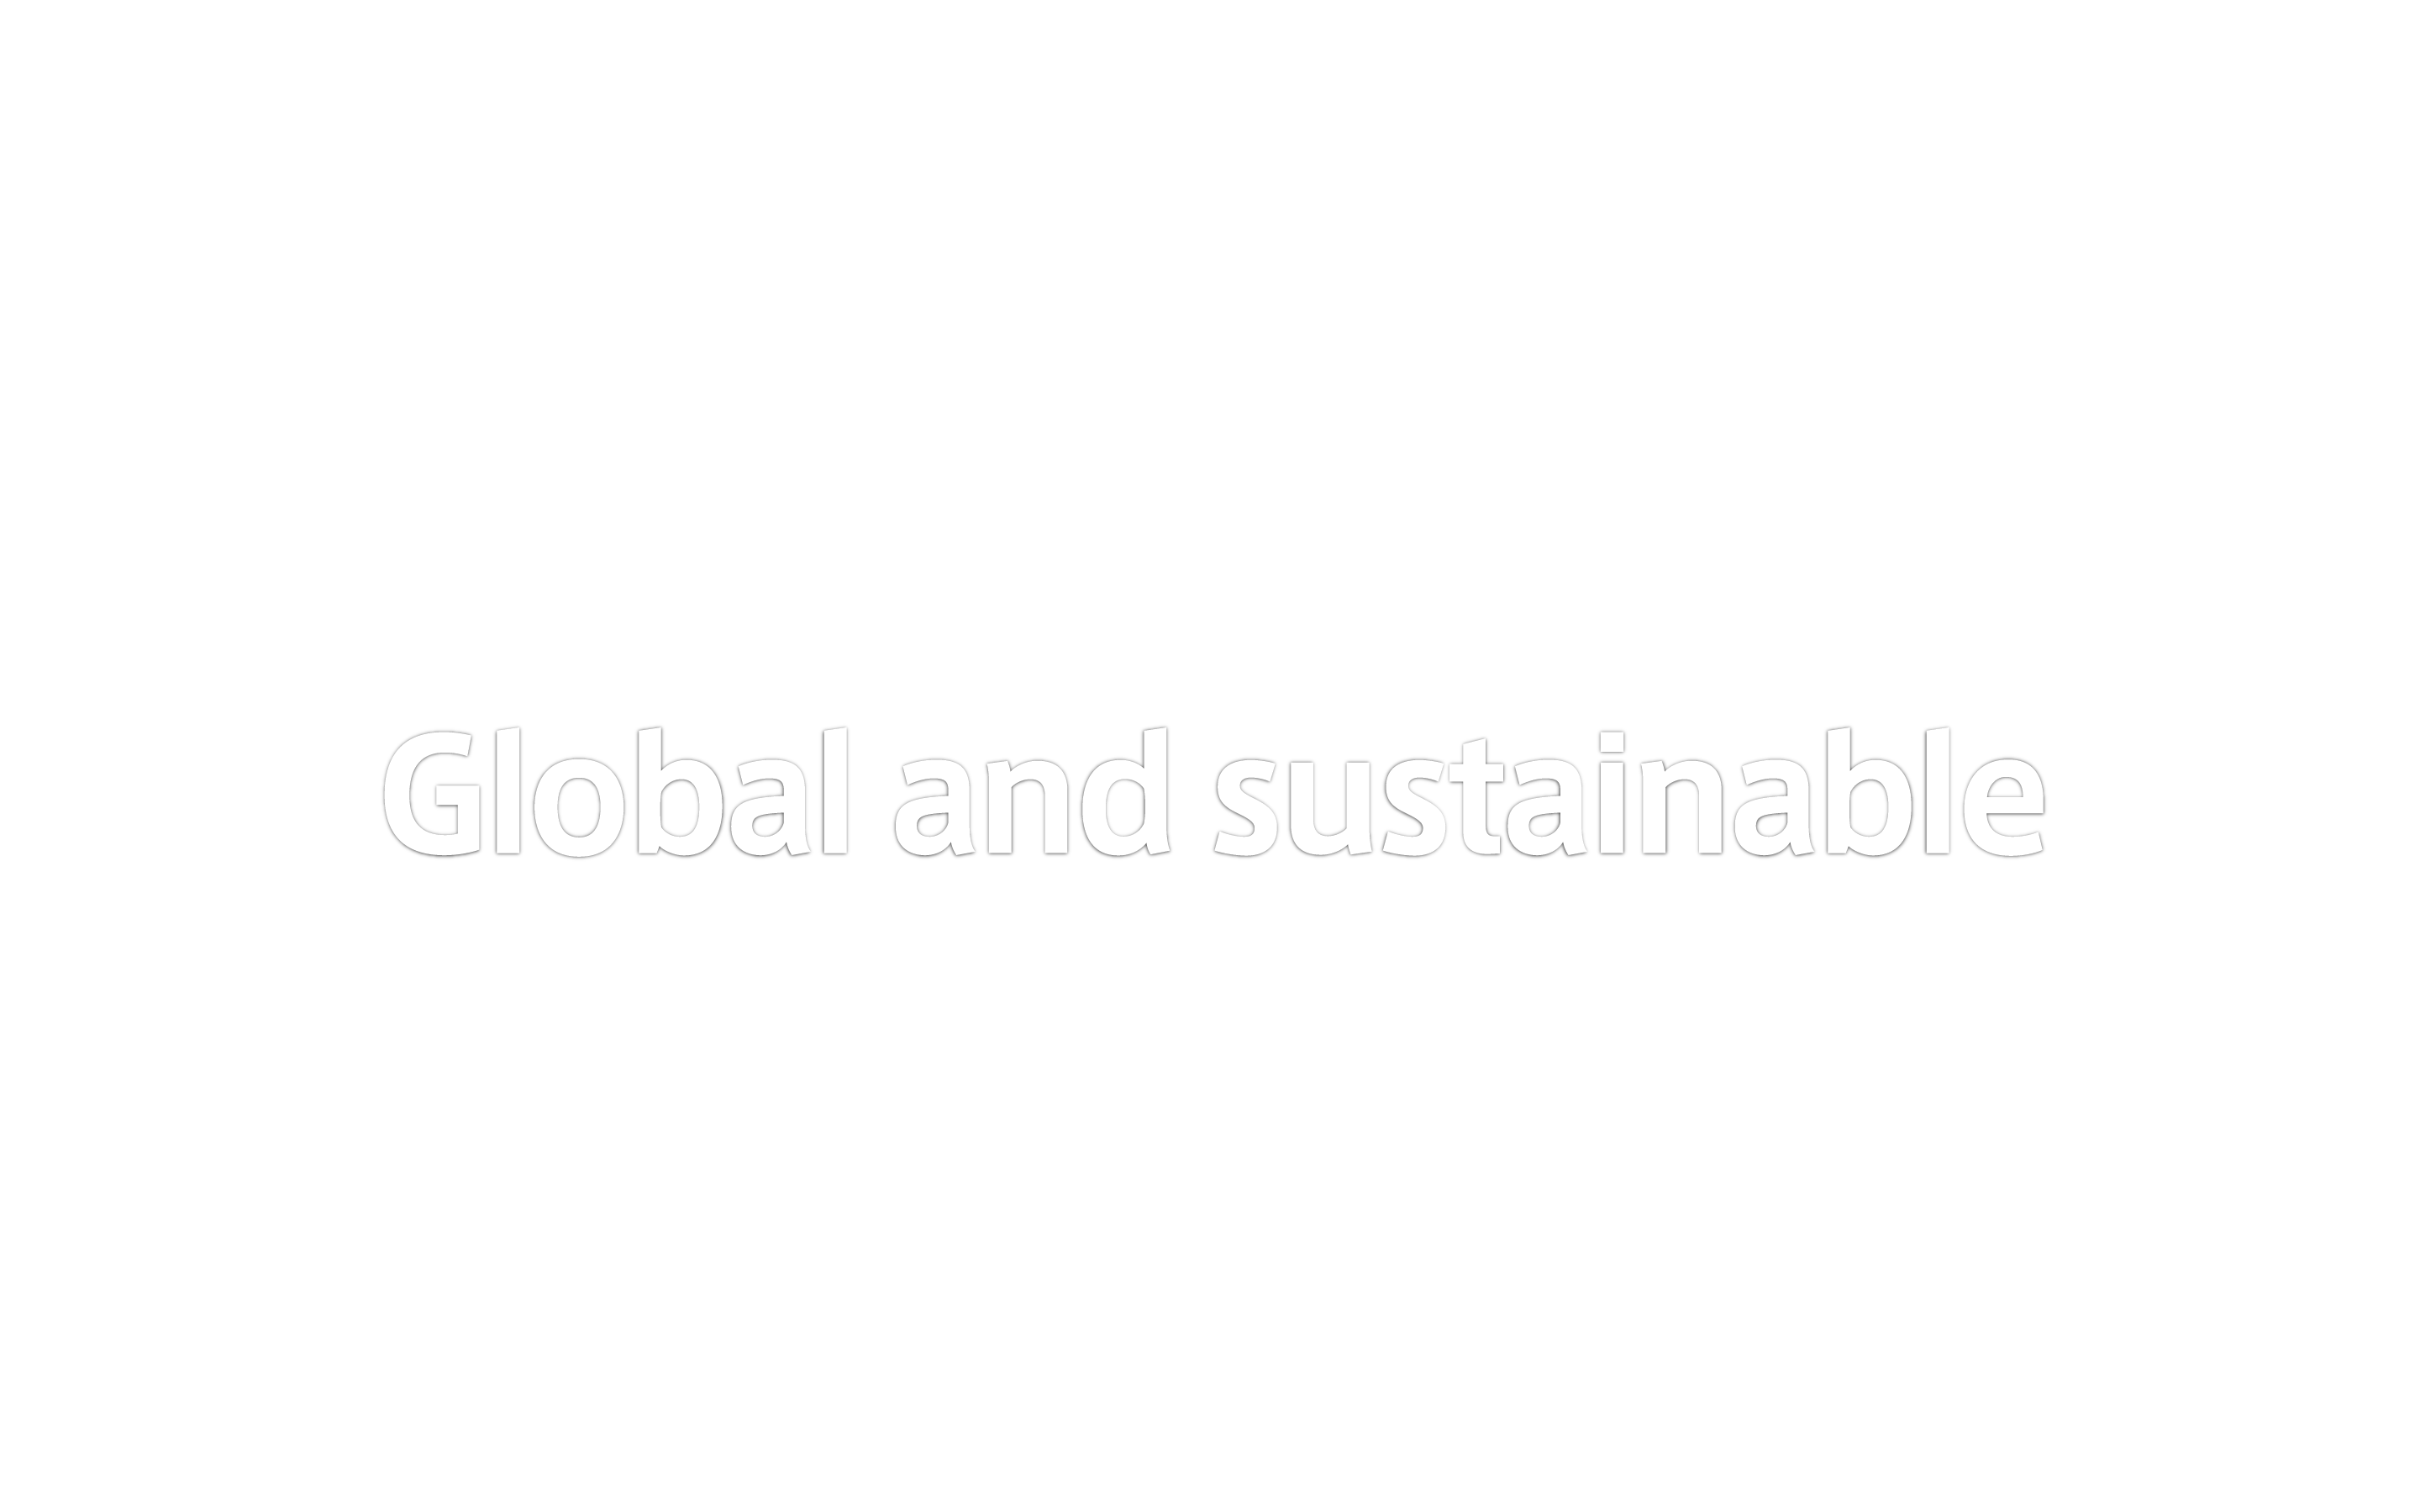 Global and sustainable